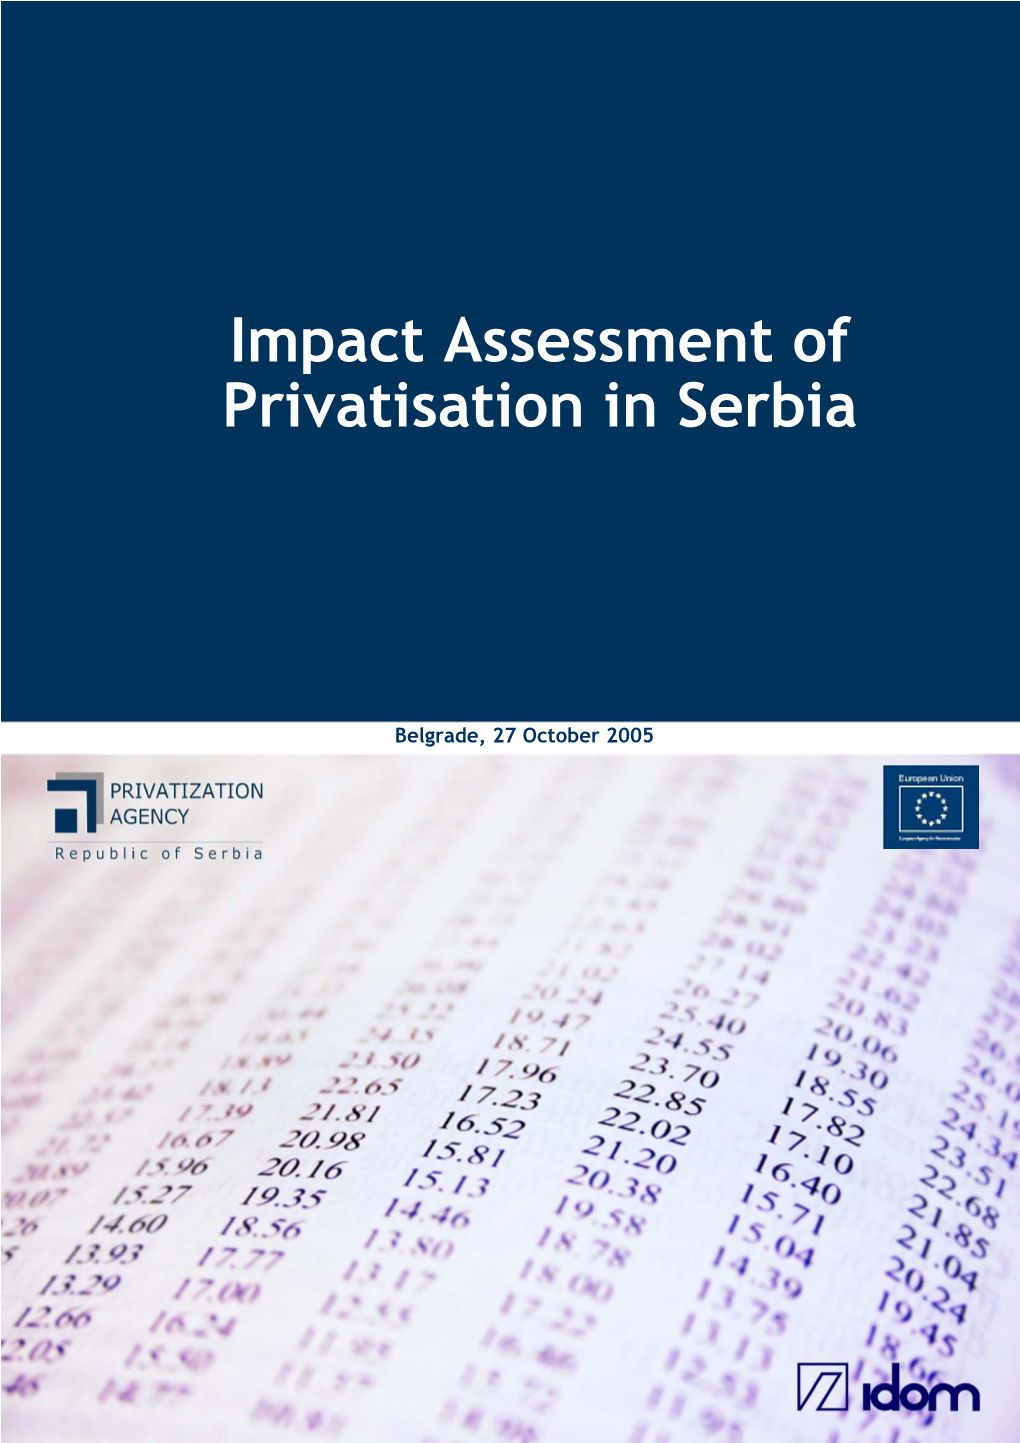 Impact Assessment of Privatisation in Serbia